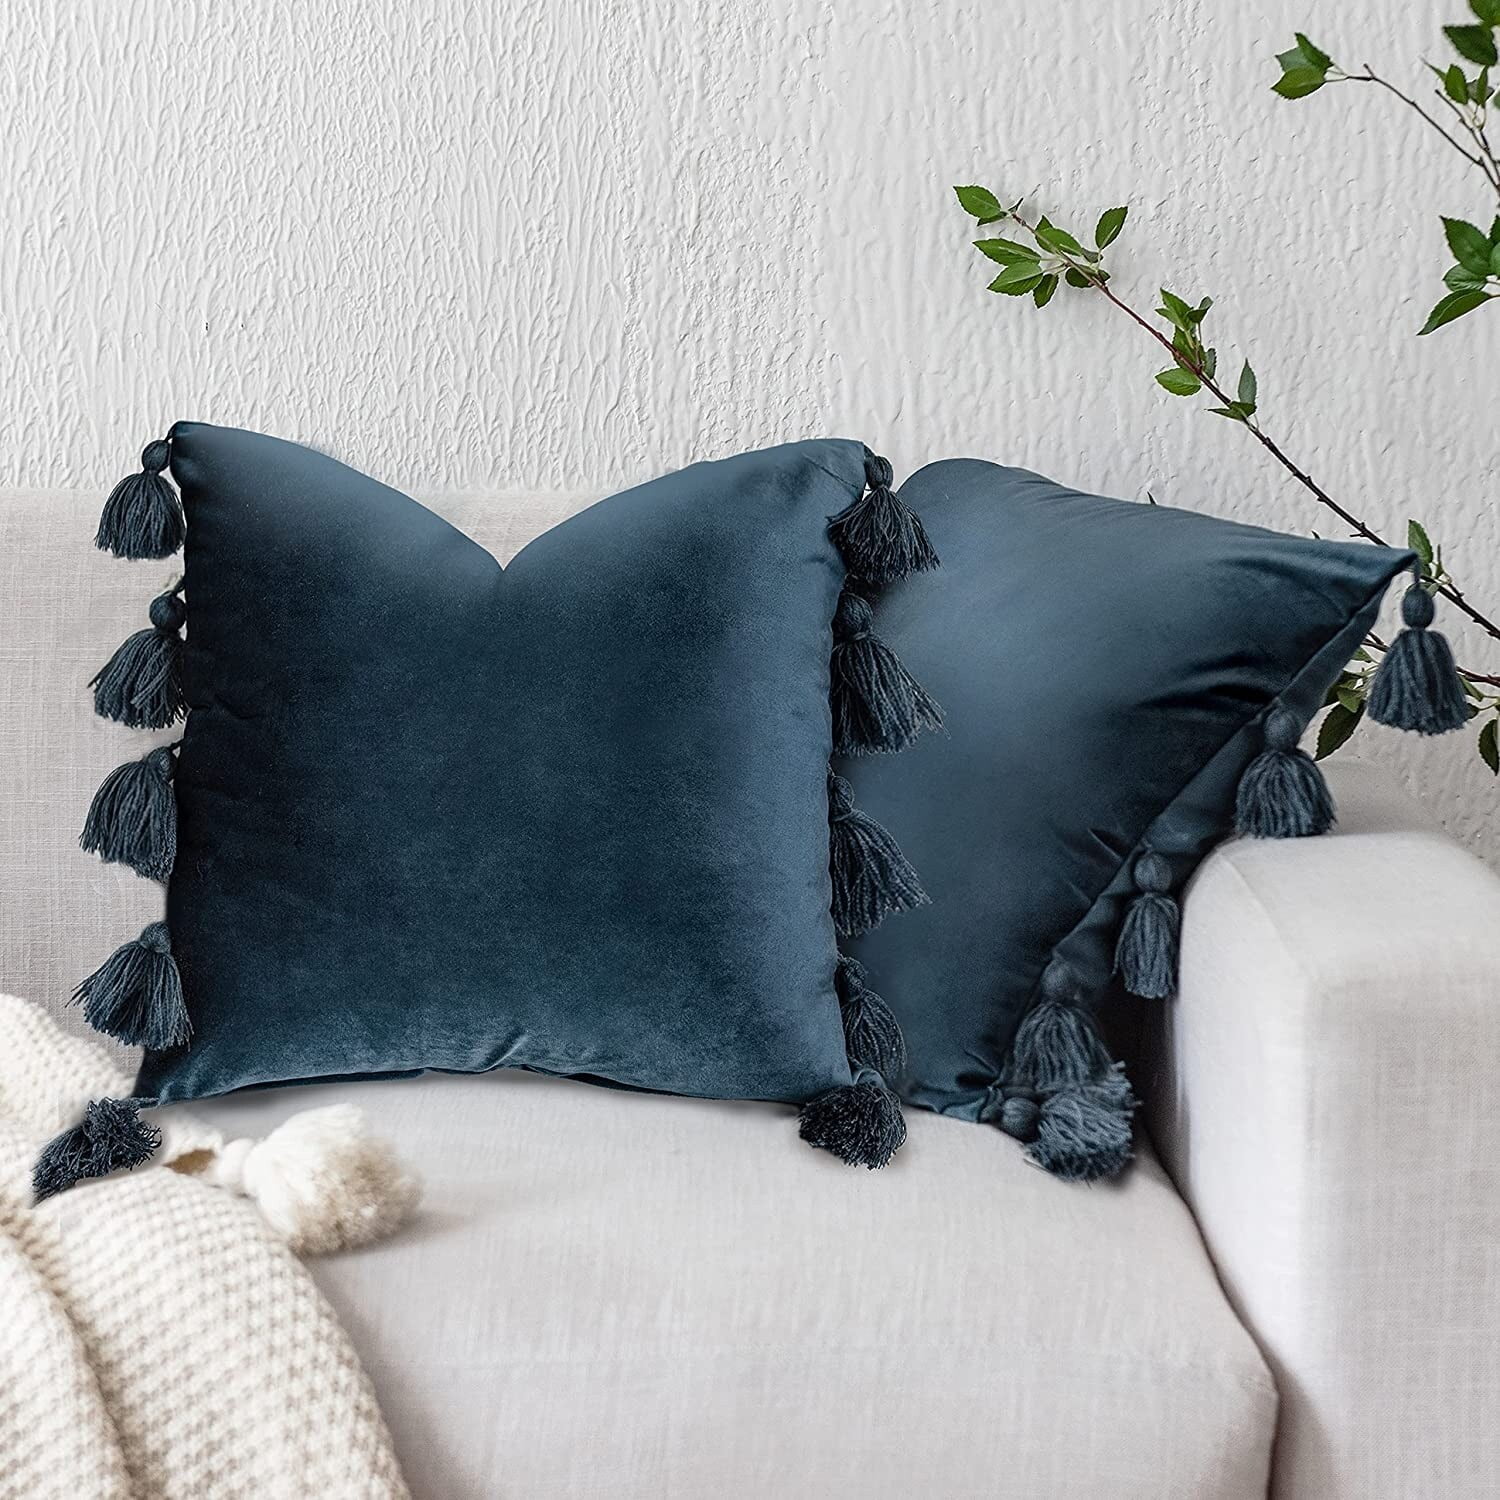  Fancy Homi 2 Packs Navy Blue Big Decorative Throw Pillow Covers  24x24 Inch for Living Room Couch Bed Sofa, Rustic Farmhouse Boho Home Decor,  Soft Corss Corduroy Patchwork Accent Cushion Case